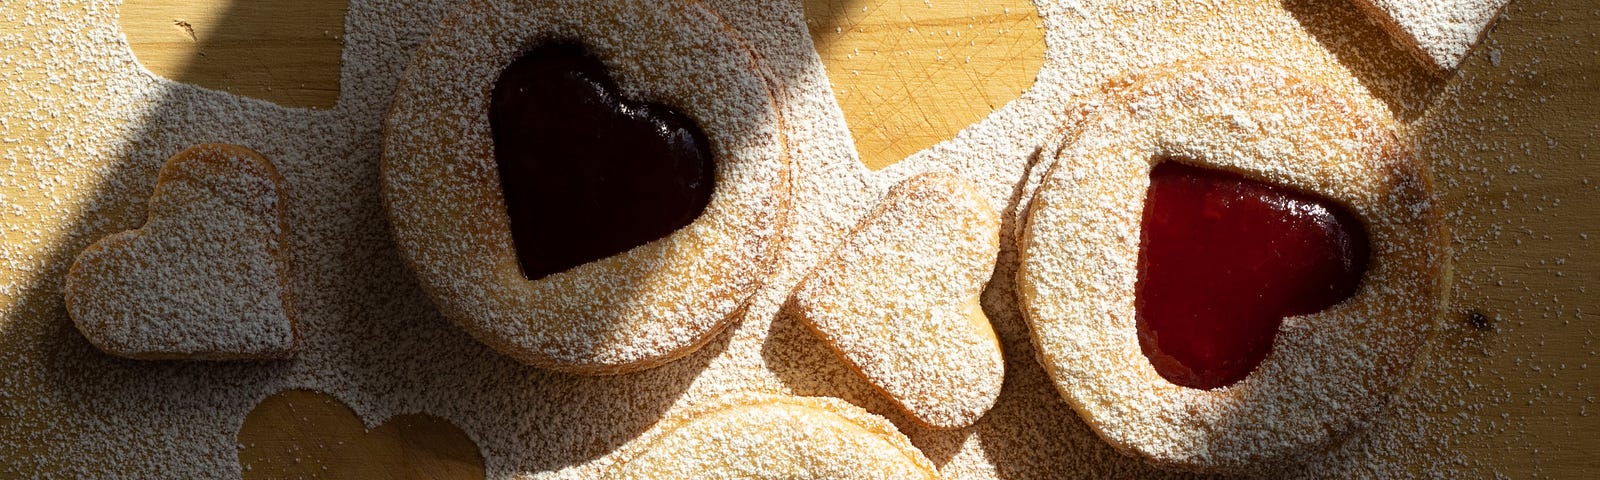 A photo of a close up shot of yummy cookies by Istvan Szabo from Pexels